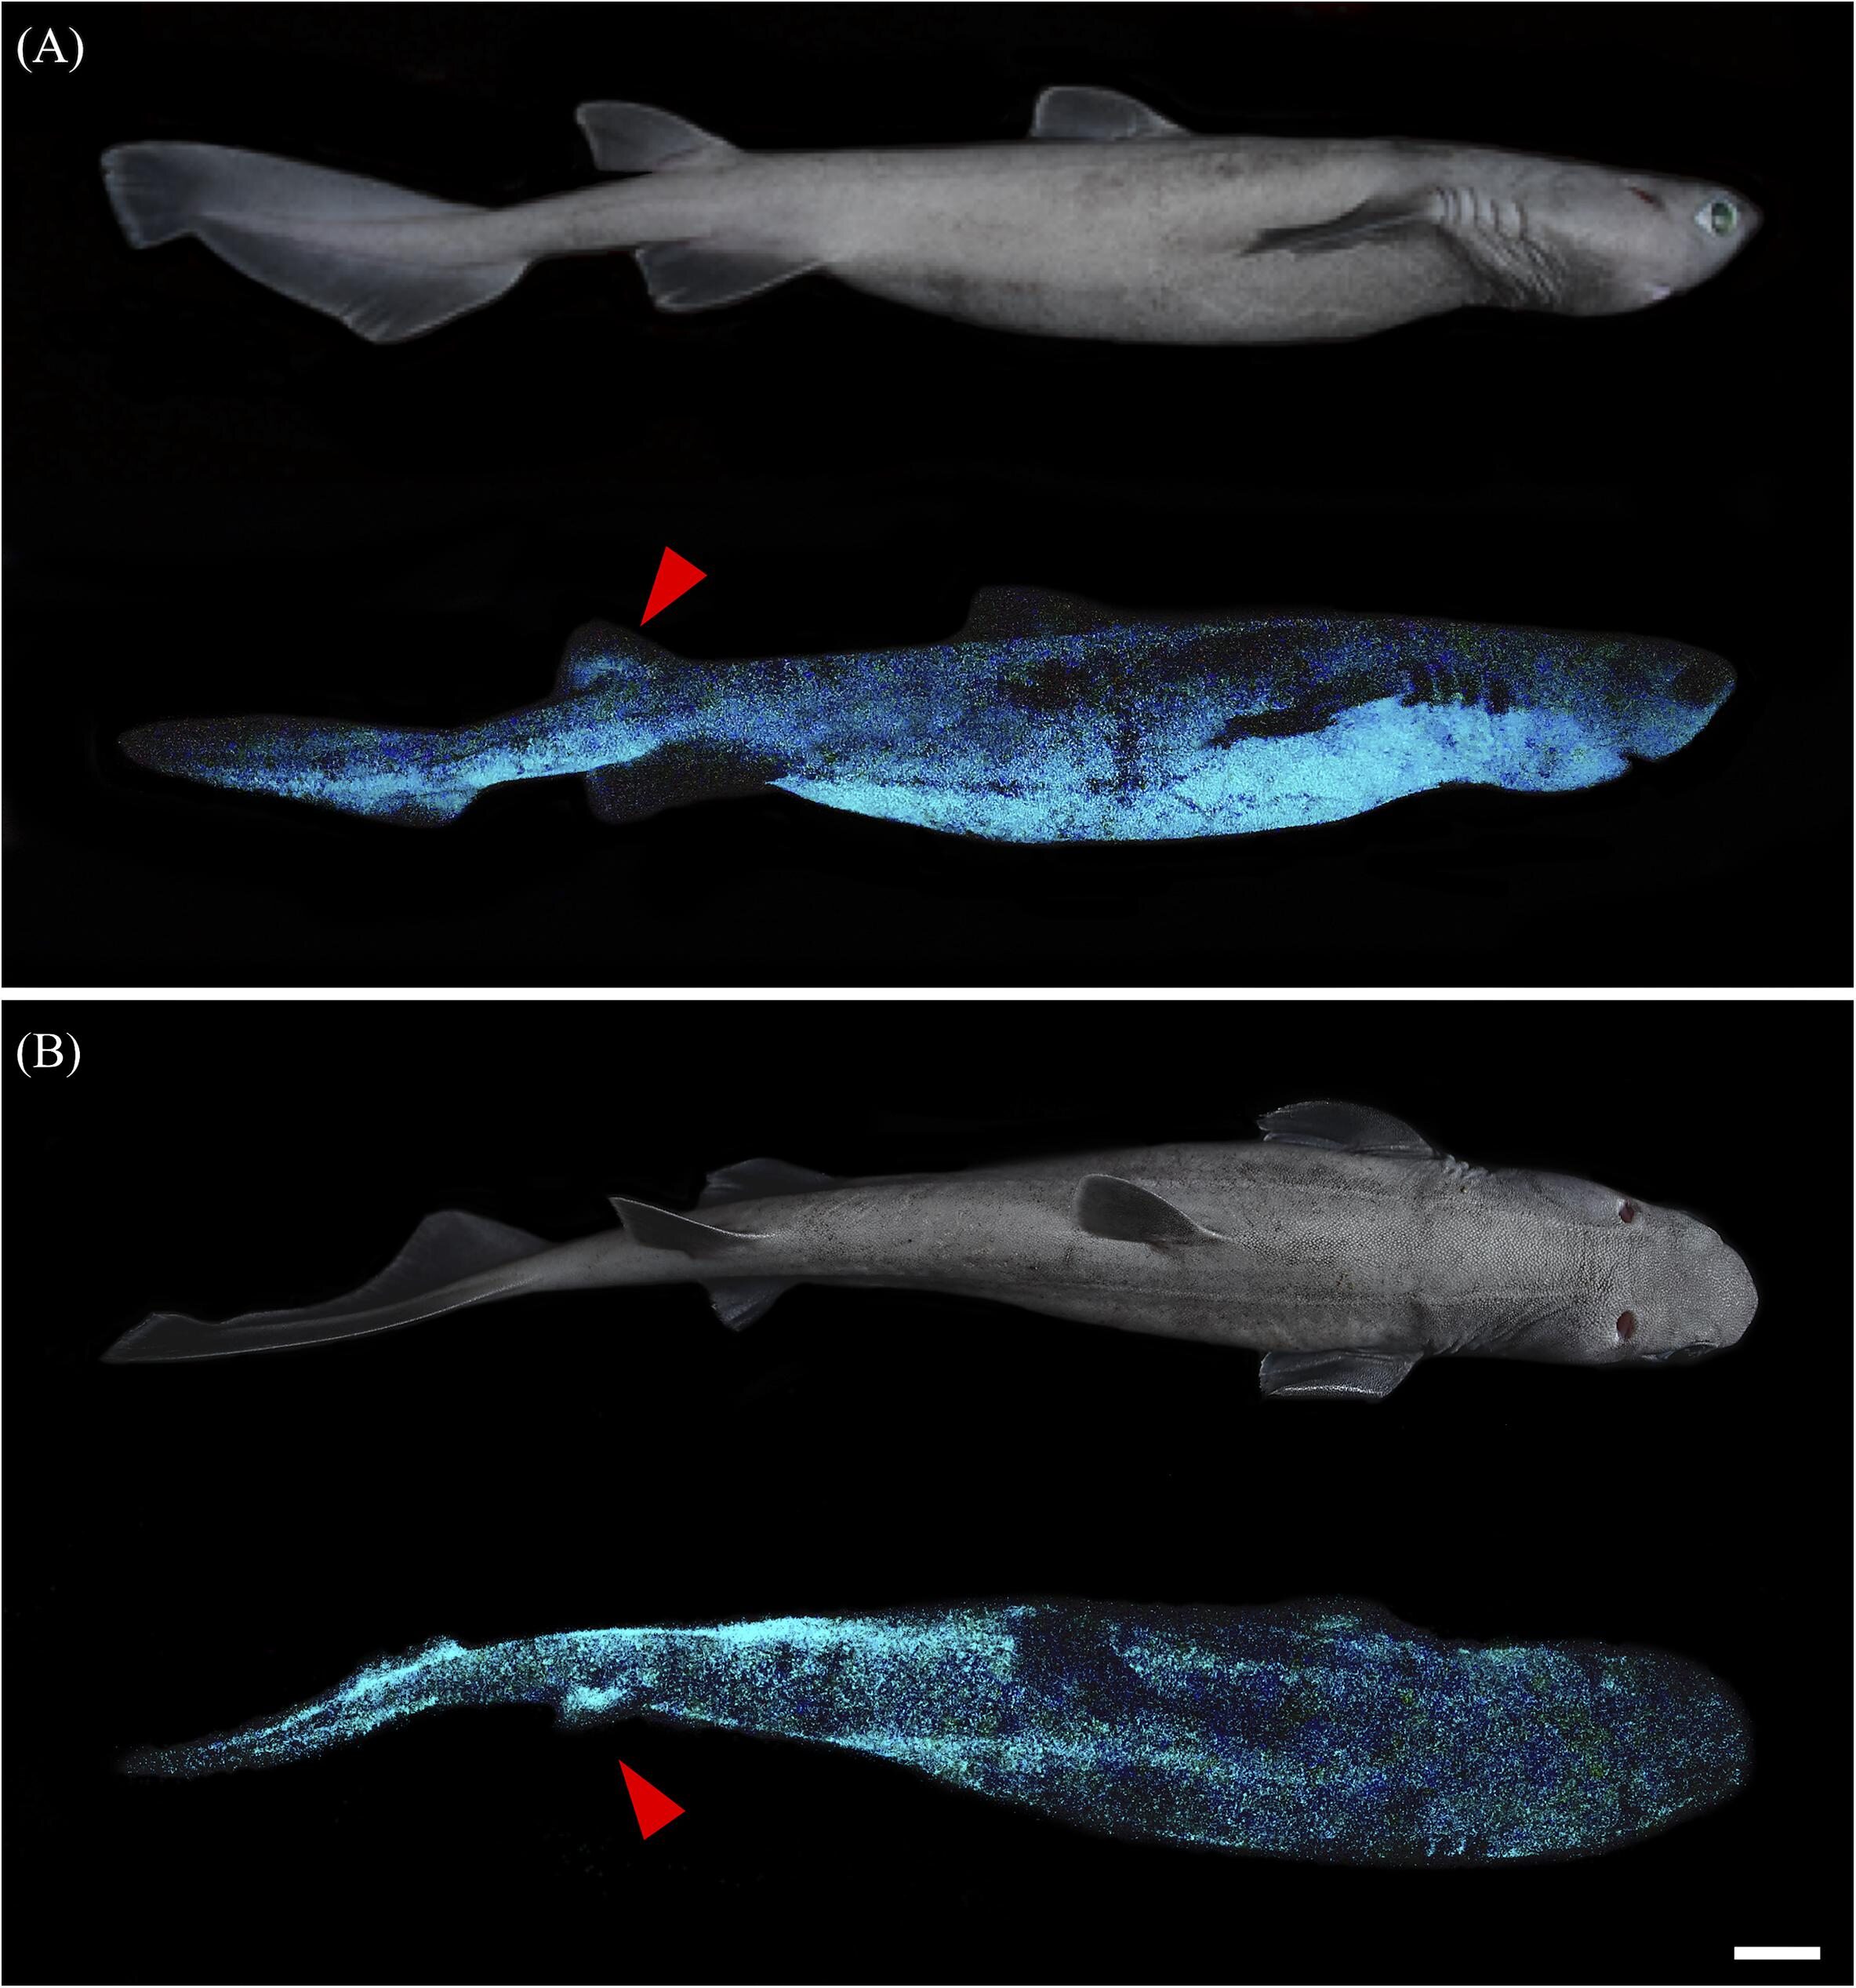 A glowing shark and the largest glowing vertebrate in the world was photographed